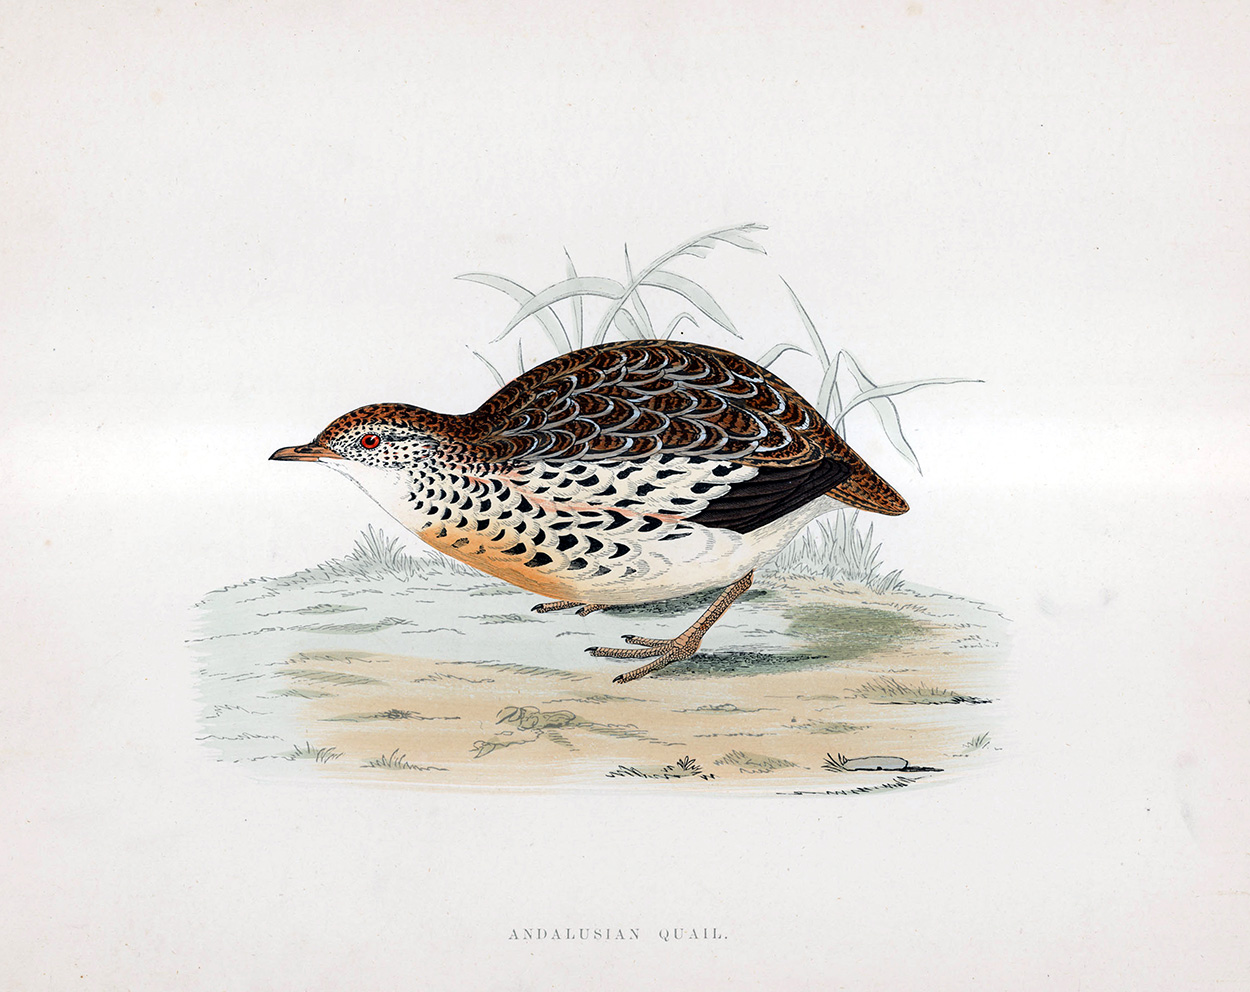 Andalusian Quail - hand coloured lithograph 1891 (Print) art by Beverley R Morris at The Illustration Art Gallery